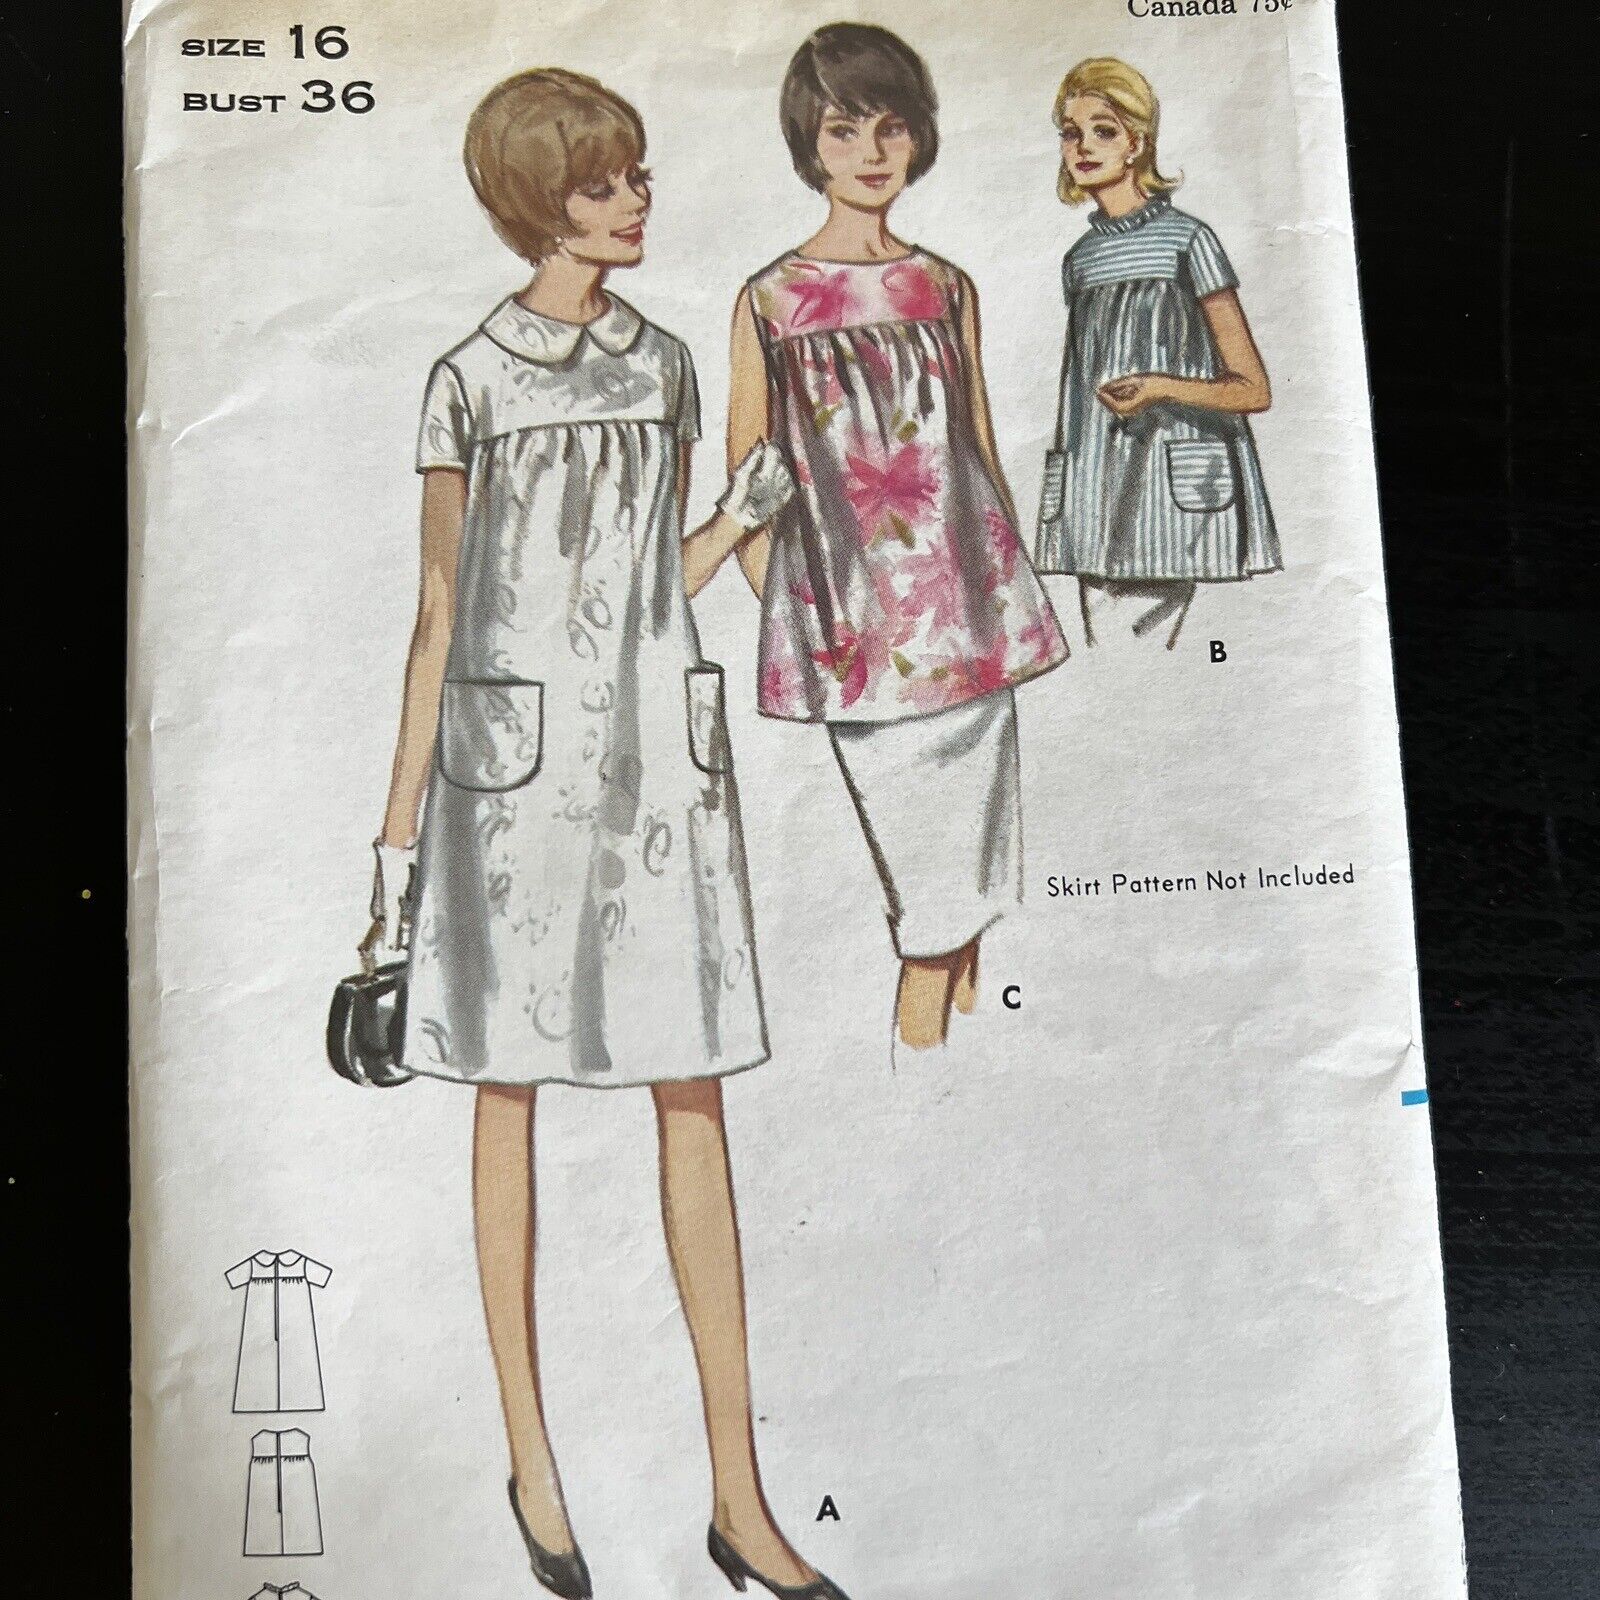 Vintage 1960s Butterick 3826 Mod Maternity Dress or Top Sewing Pattern 16 CUT